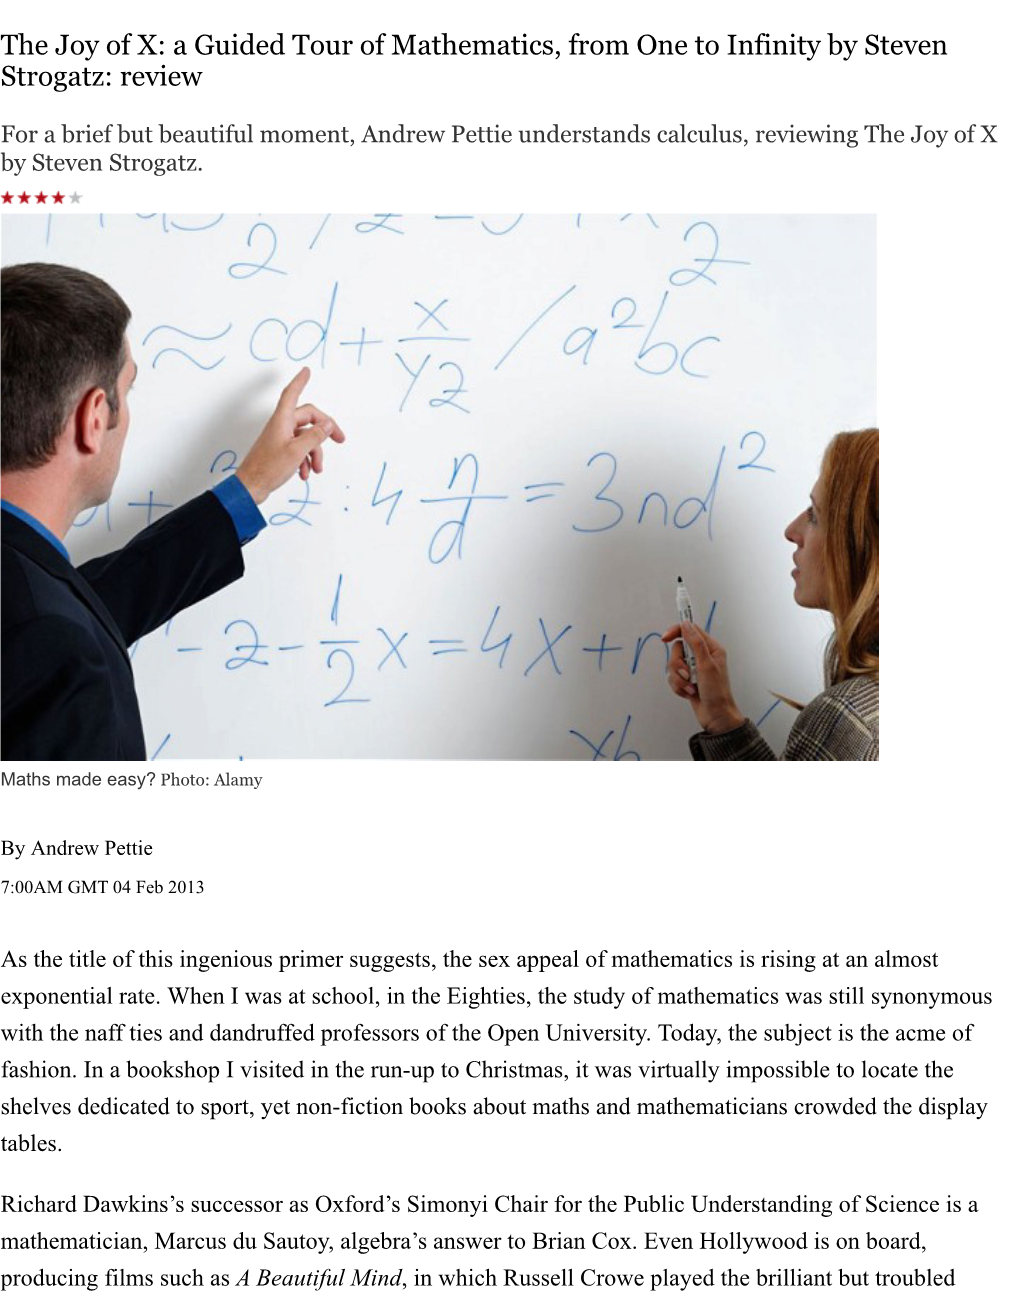 The Joy of X: a Guided Tour of Mathematics, from One to Infinity by Steven Strogatz: Review